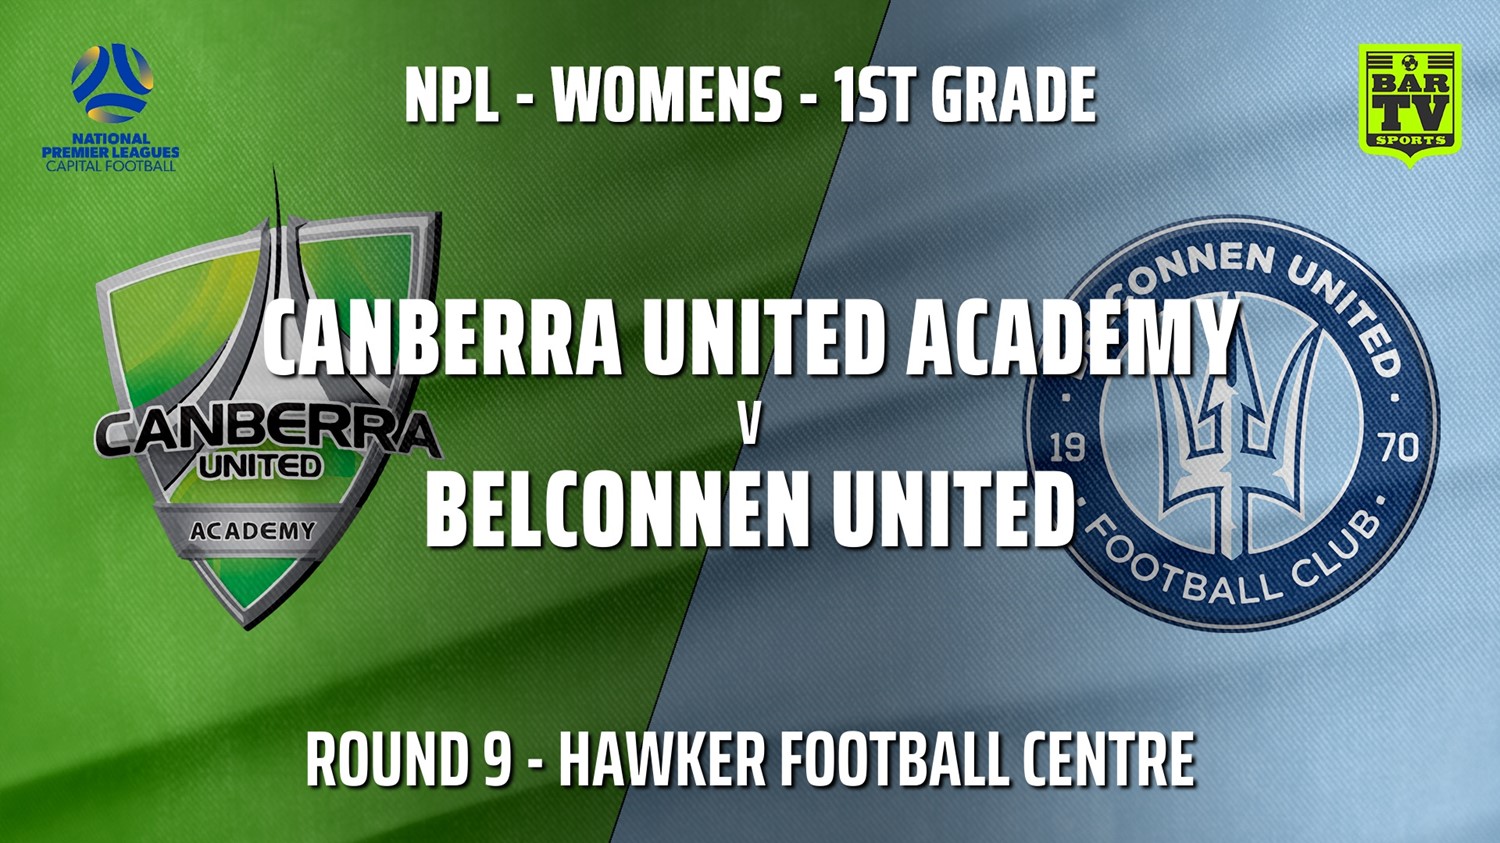 210613-Capital Womens Round 9 - Canberra United Academy v Belconnen United (women) Slate Image